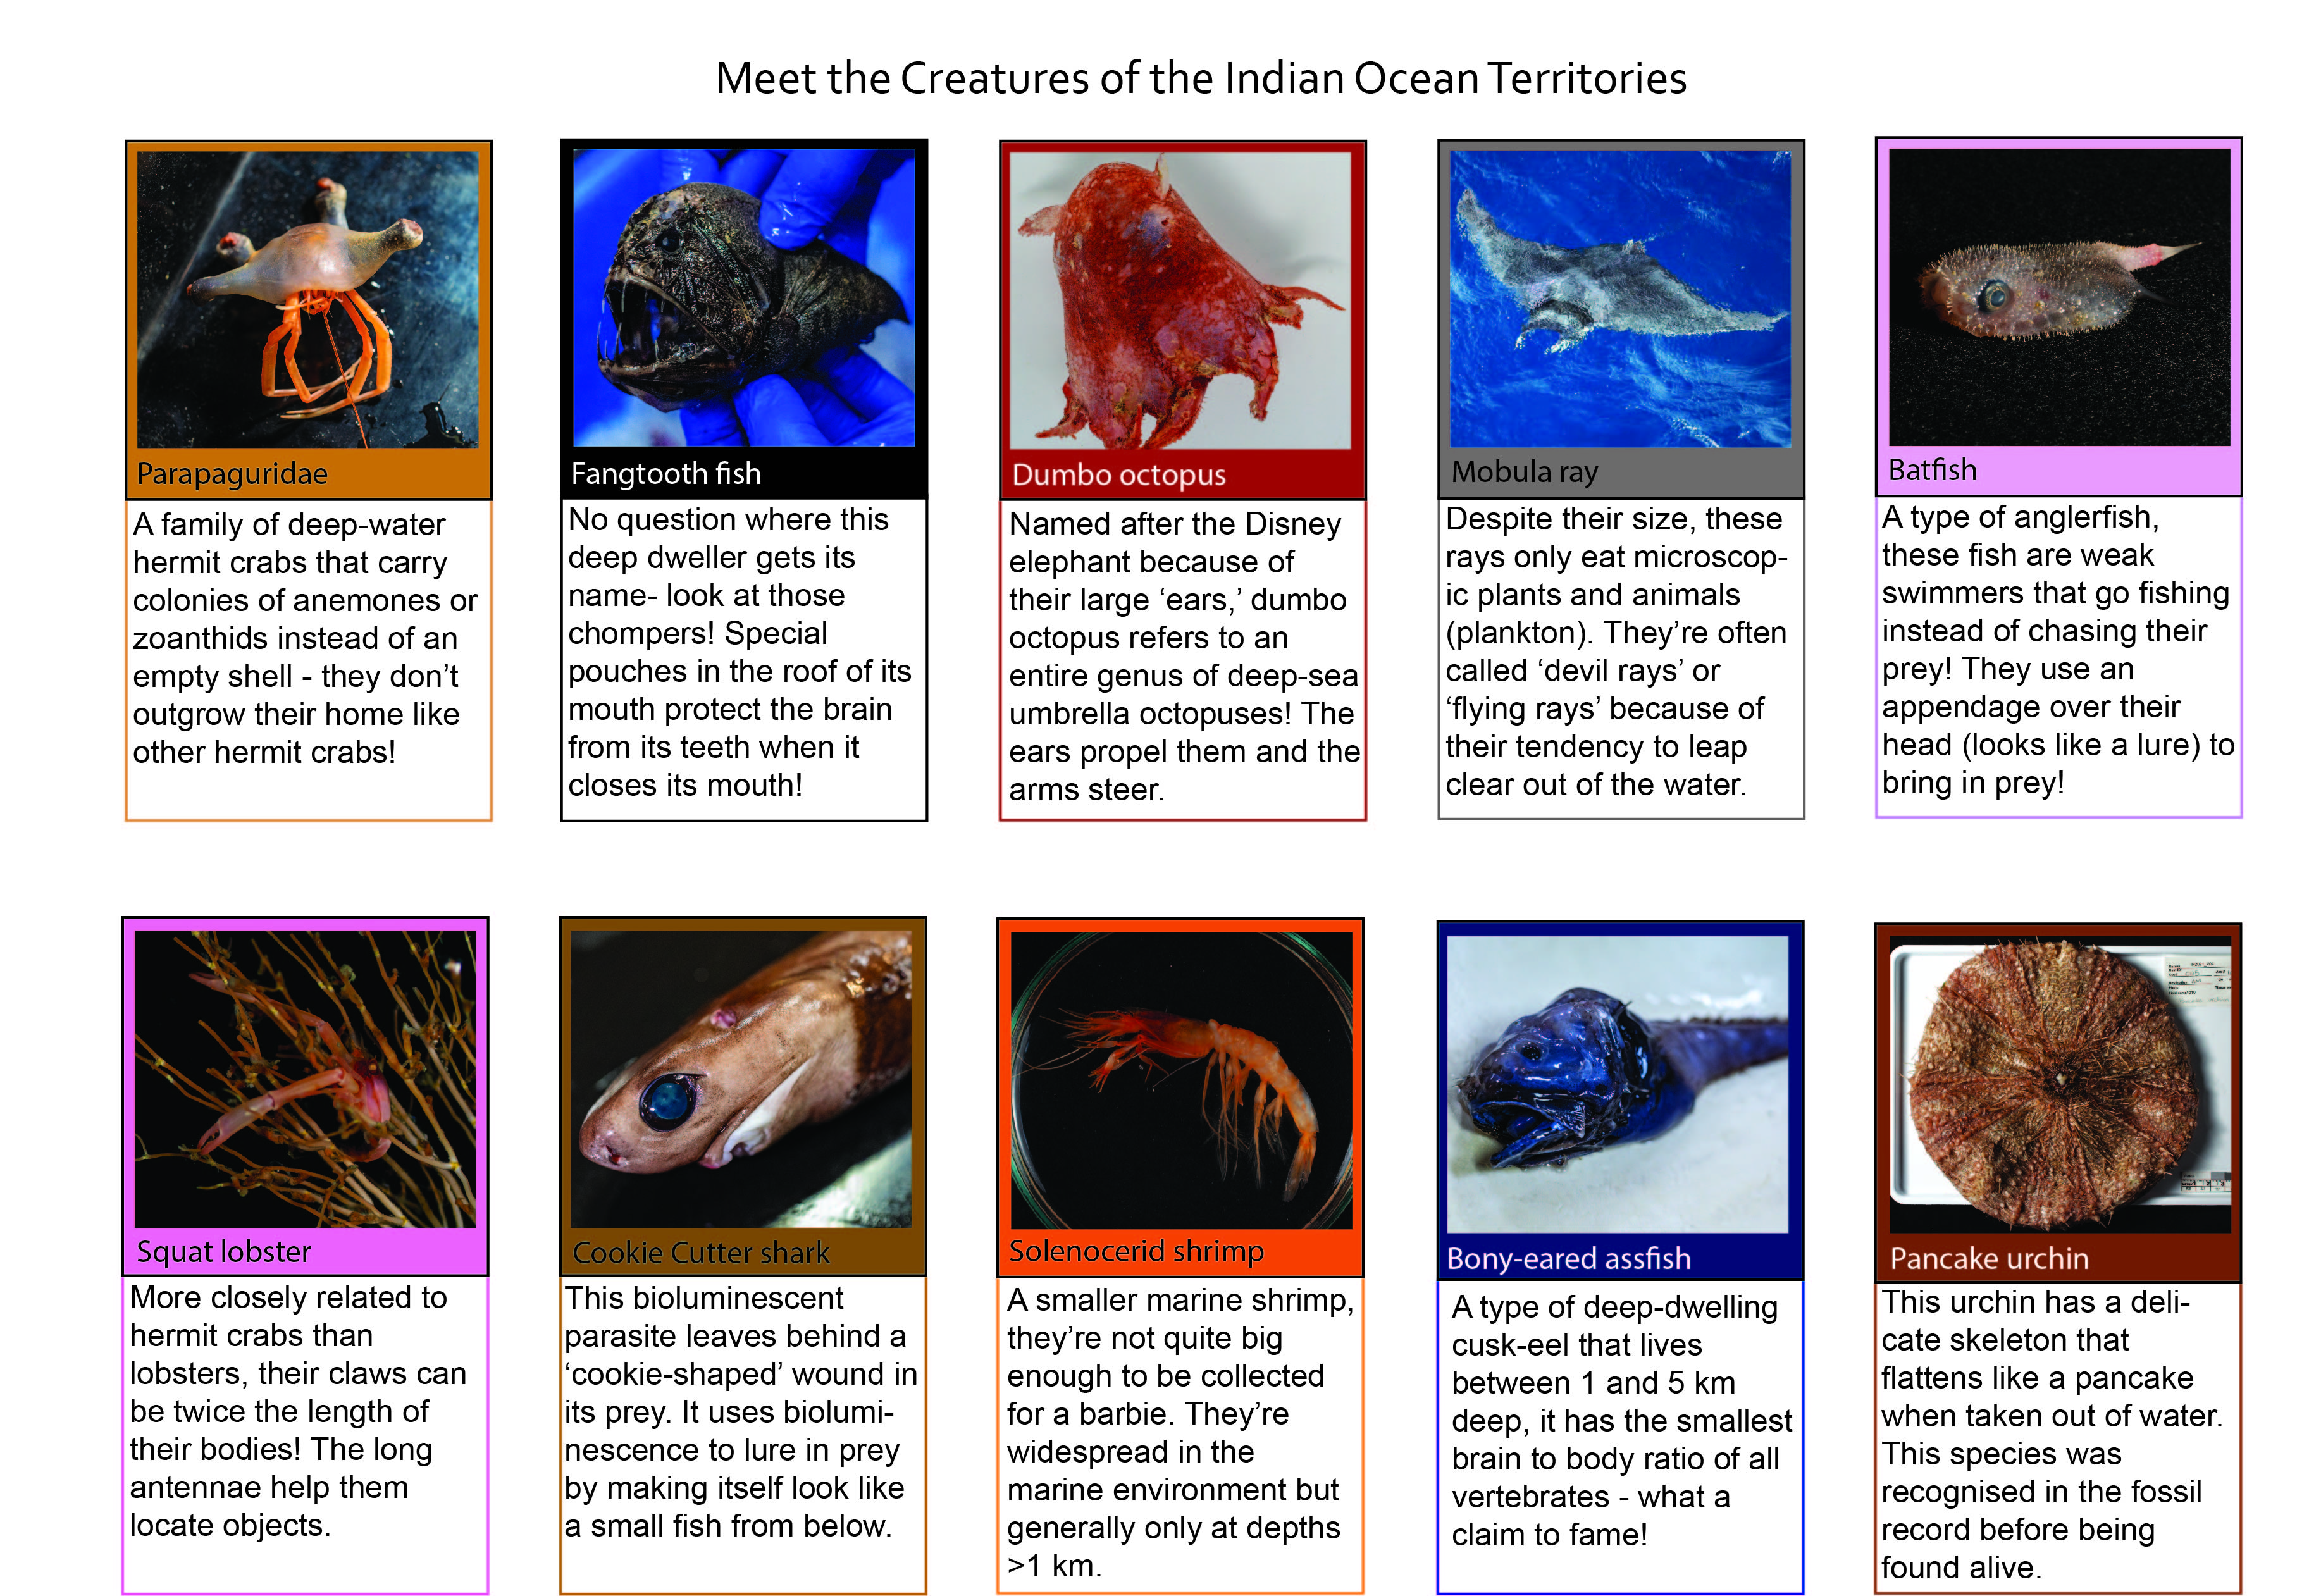 Deep sea critters fact sheet (From species found on the Investigating the Indian Oceans Territory Voyage 2021)